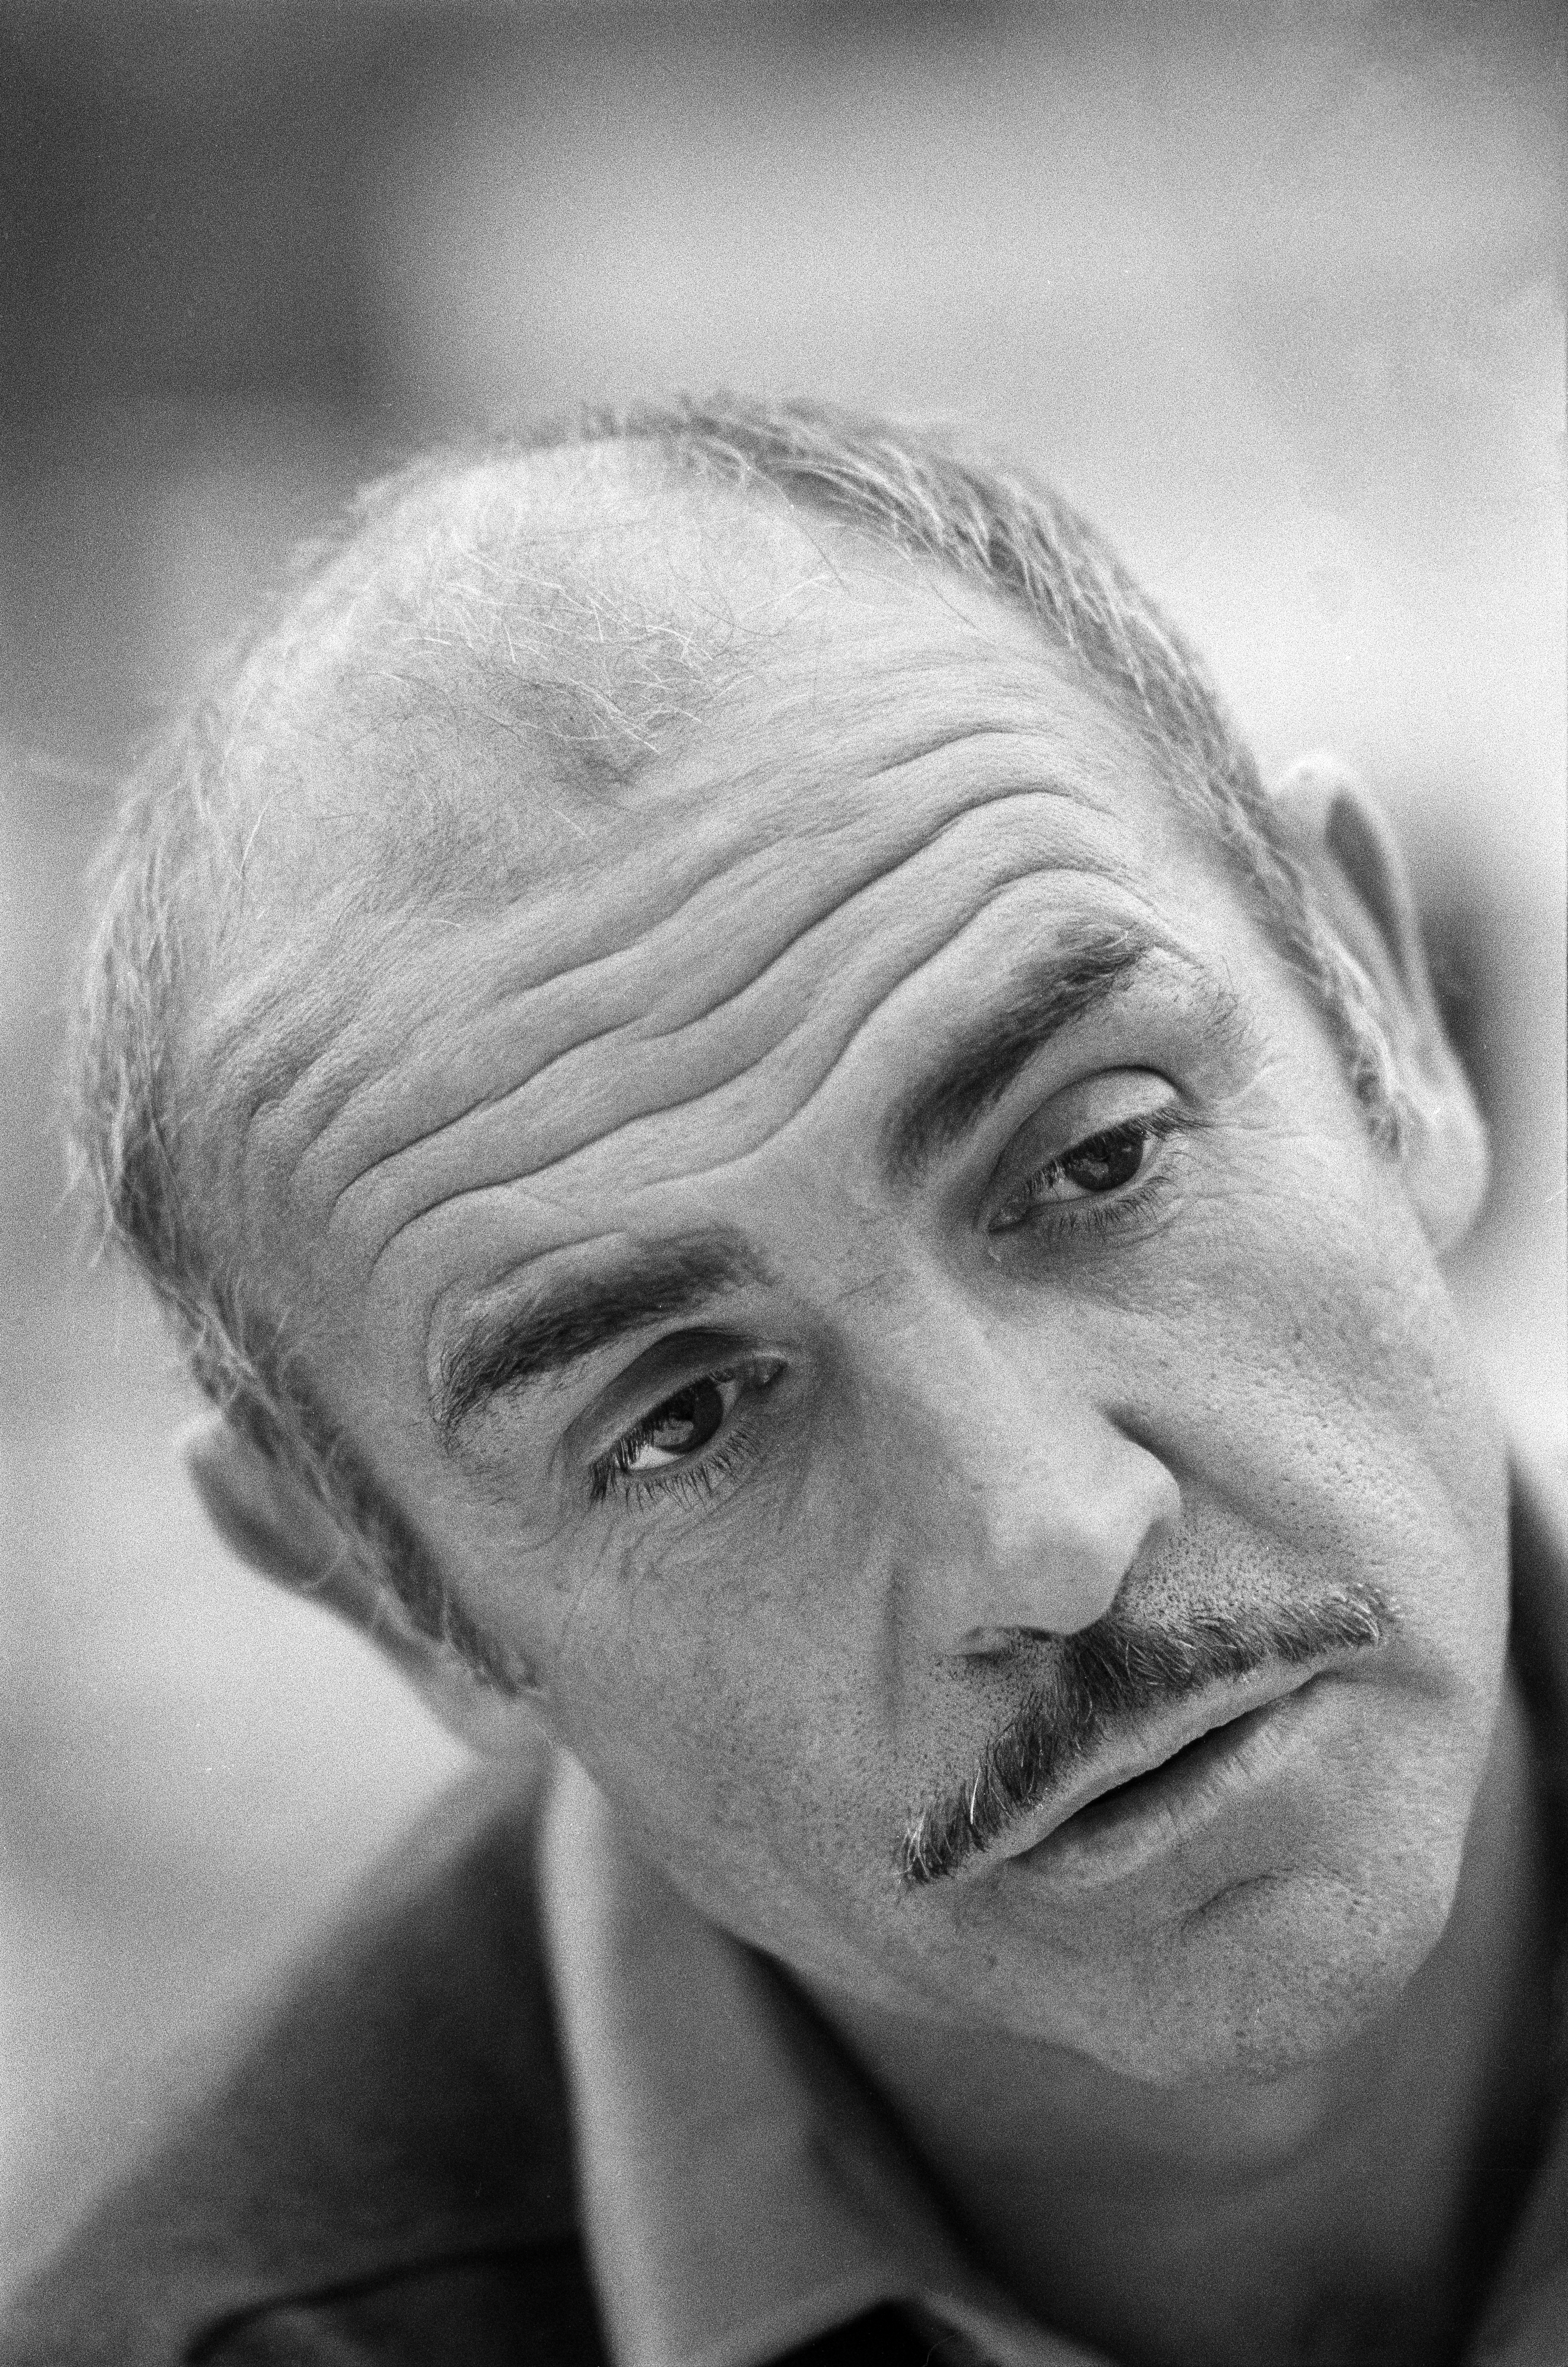 A close-up portrait of Sean Connery with a contemplative expression